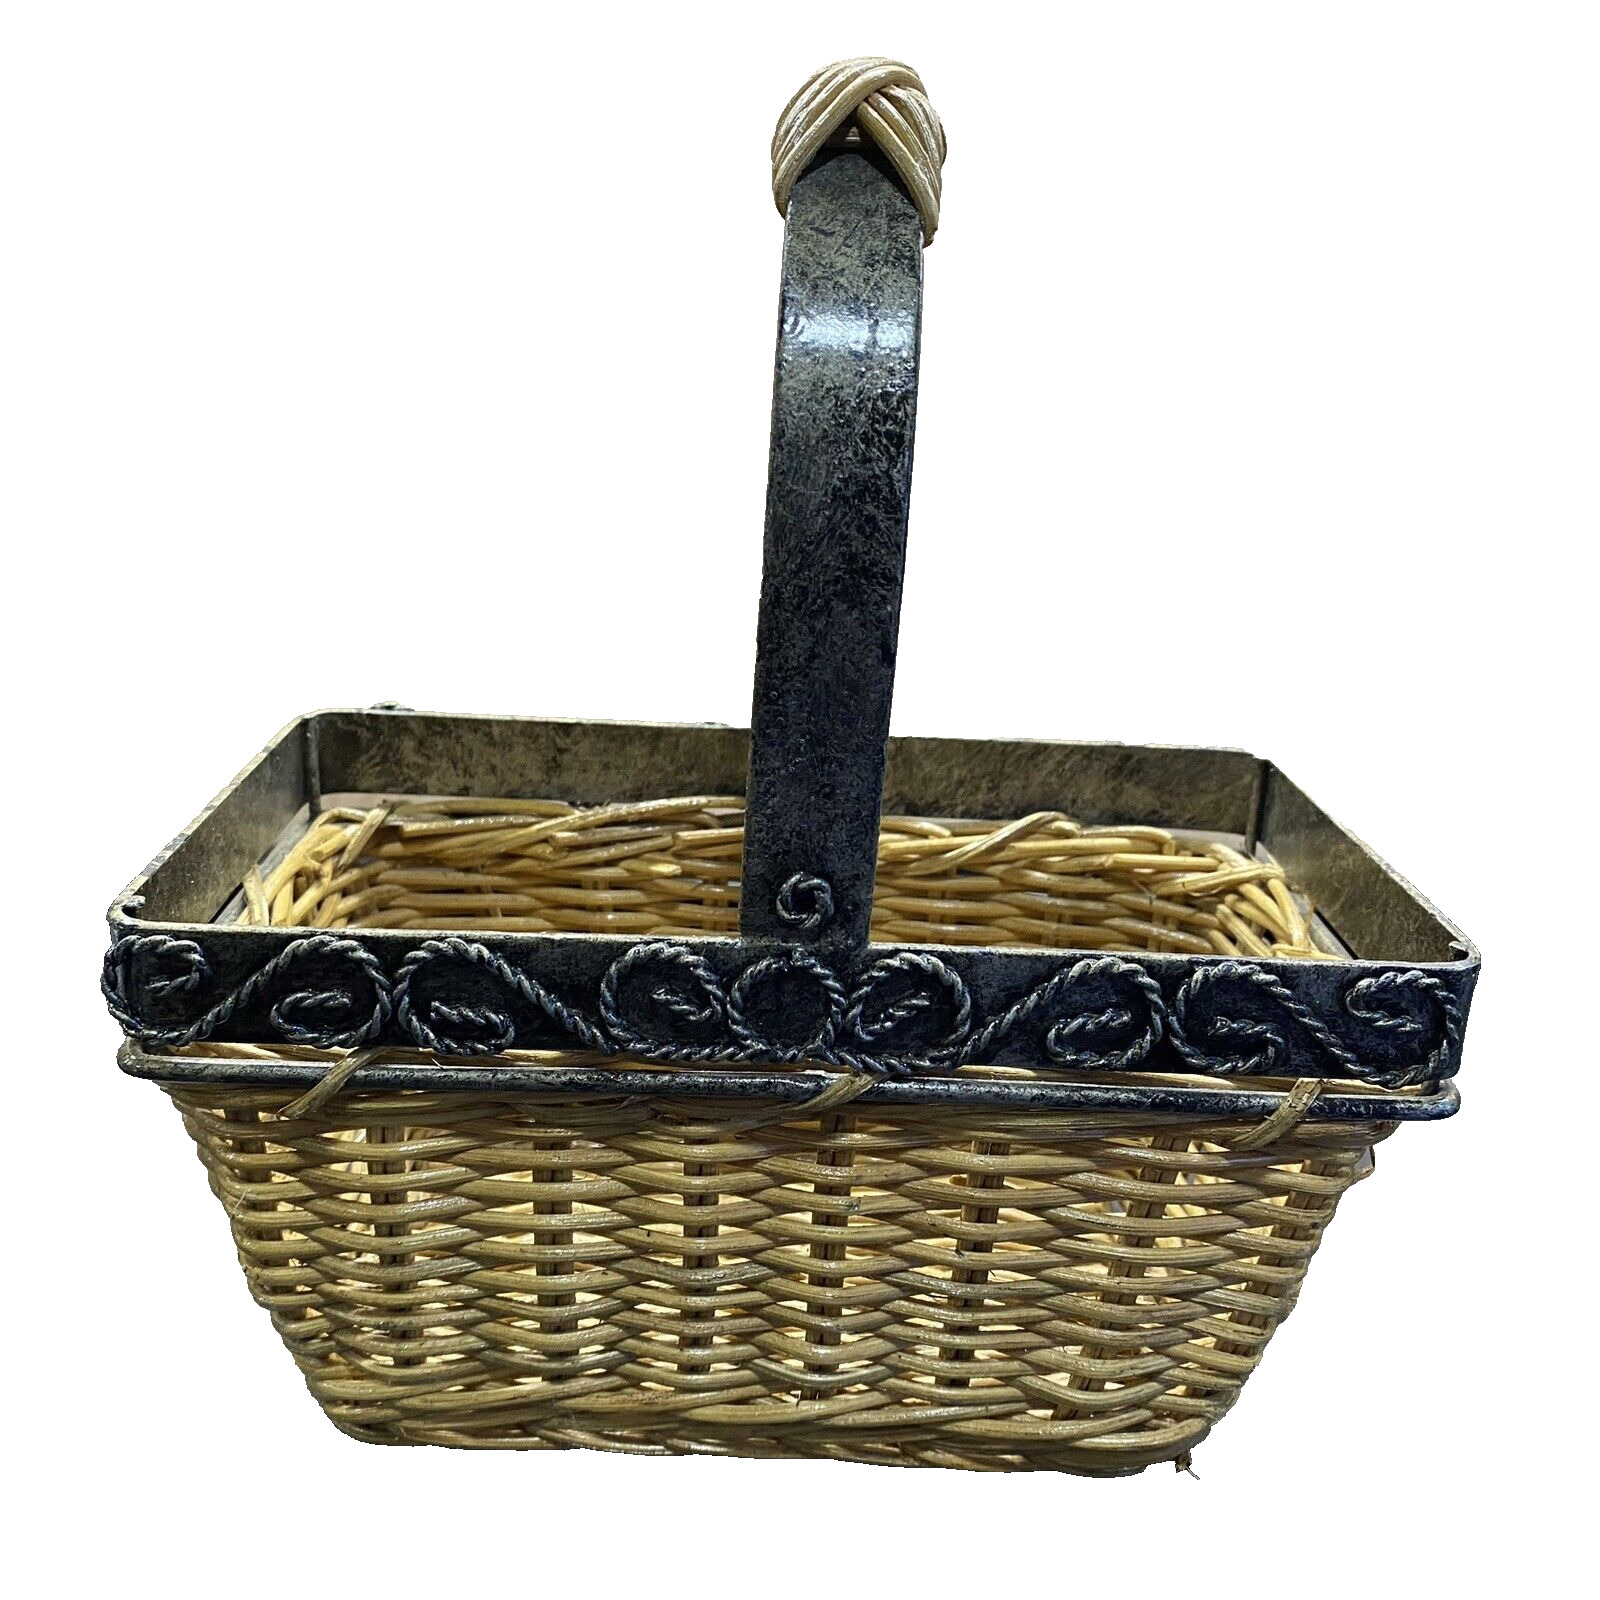 Woven Wood Basket Metal Engraved Rope Weave Pattern Top Handle Cottagecore